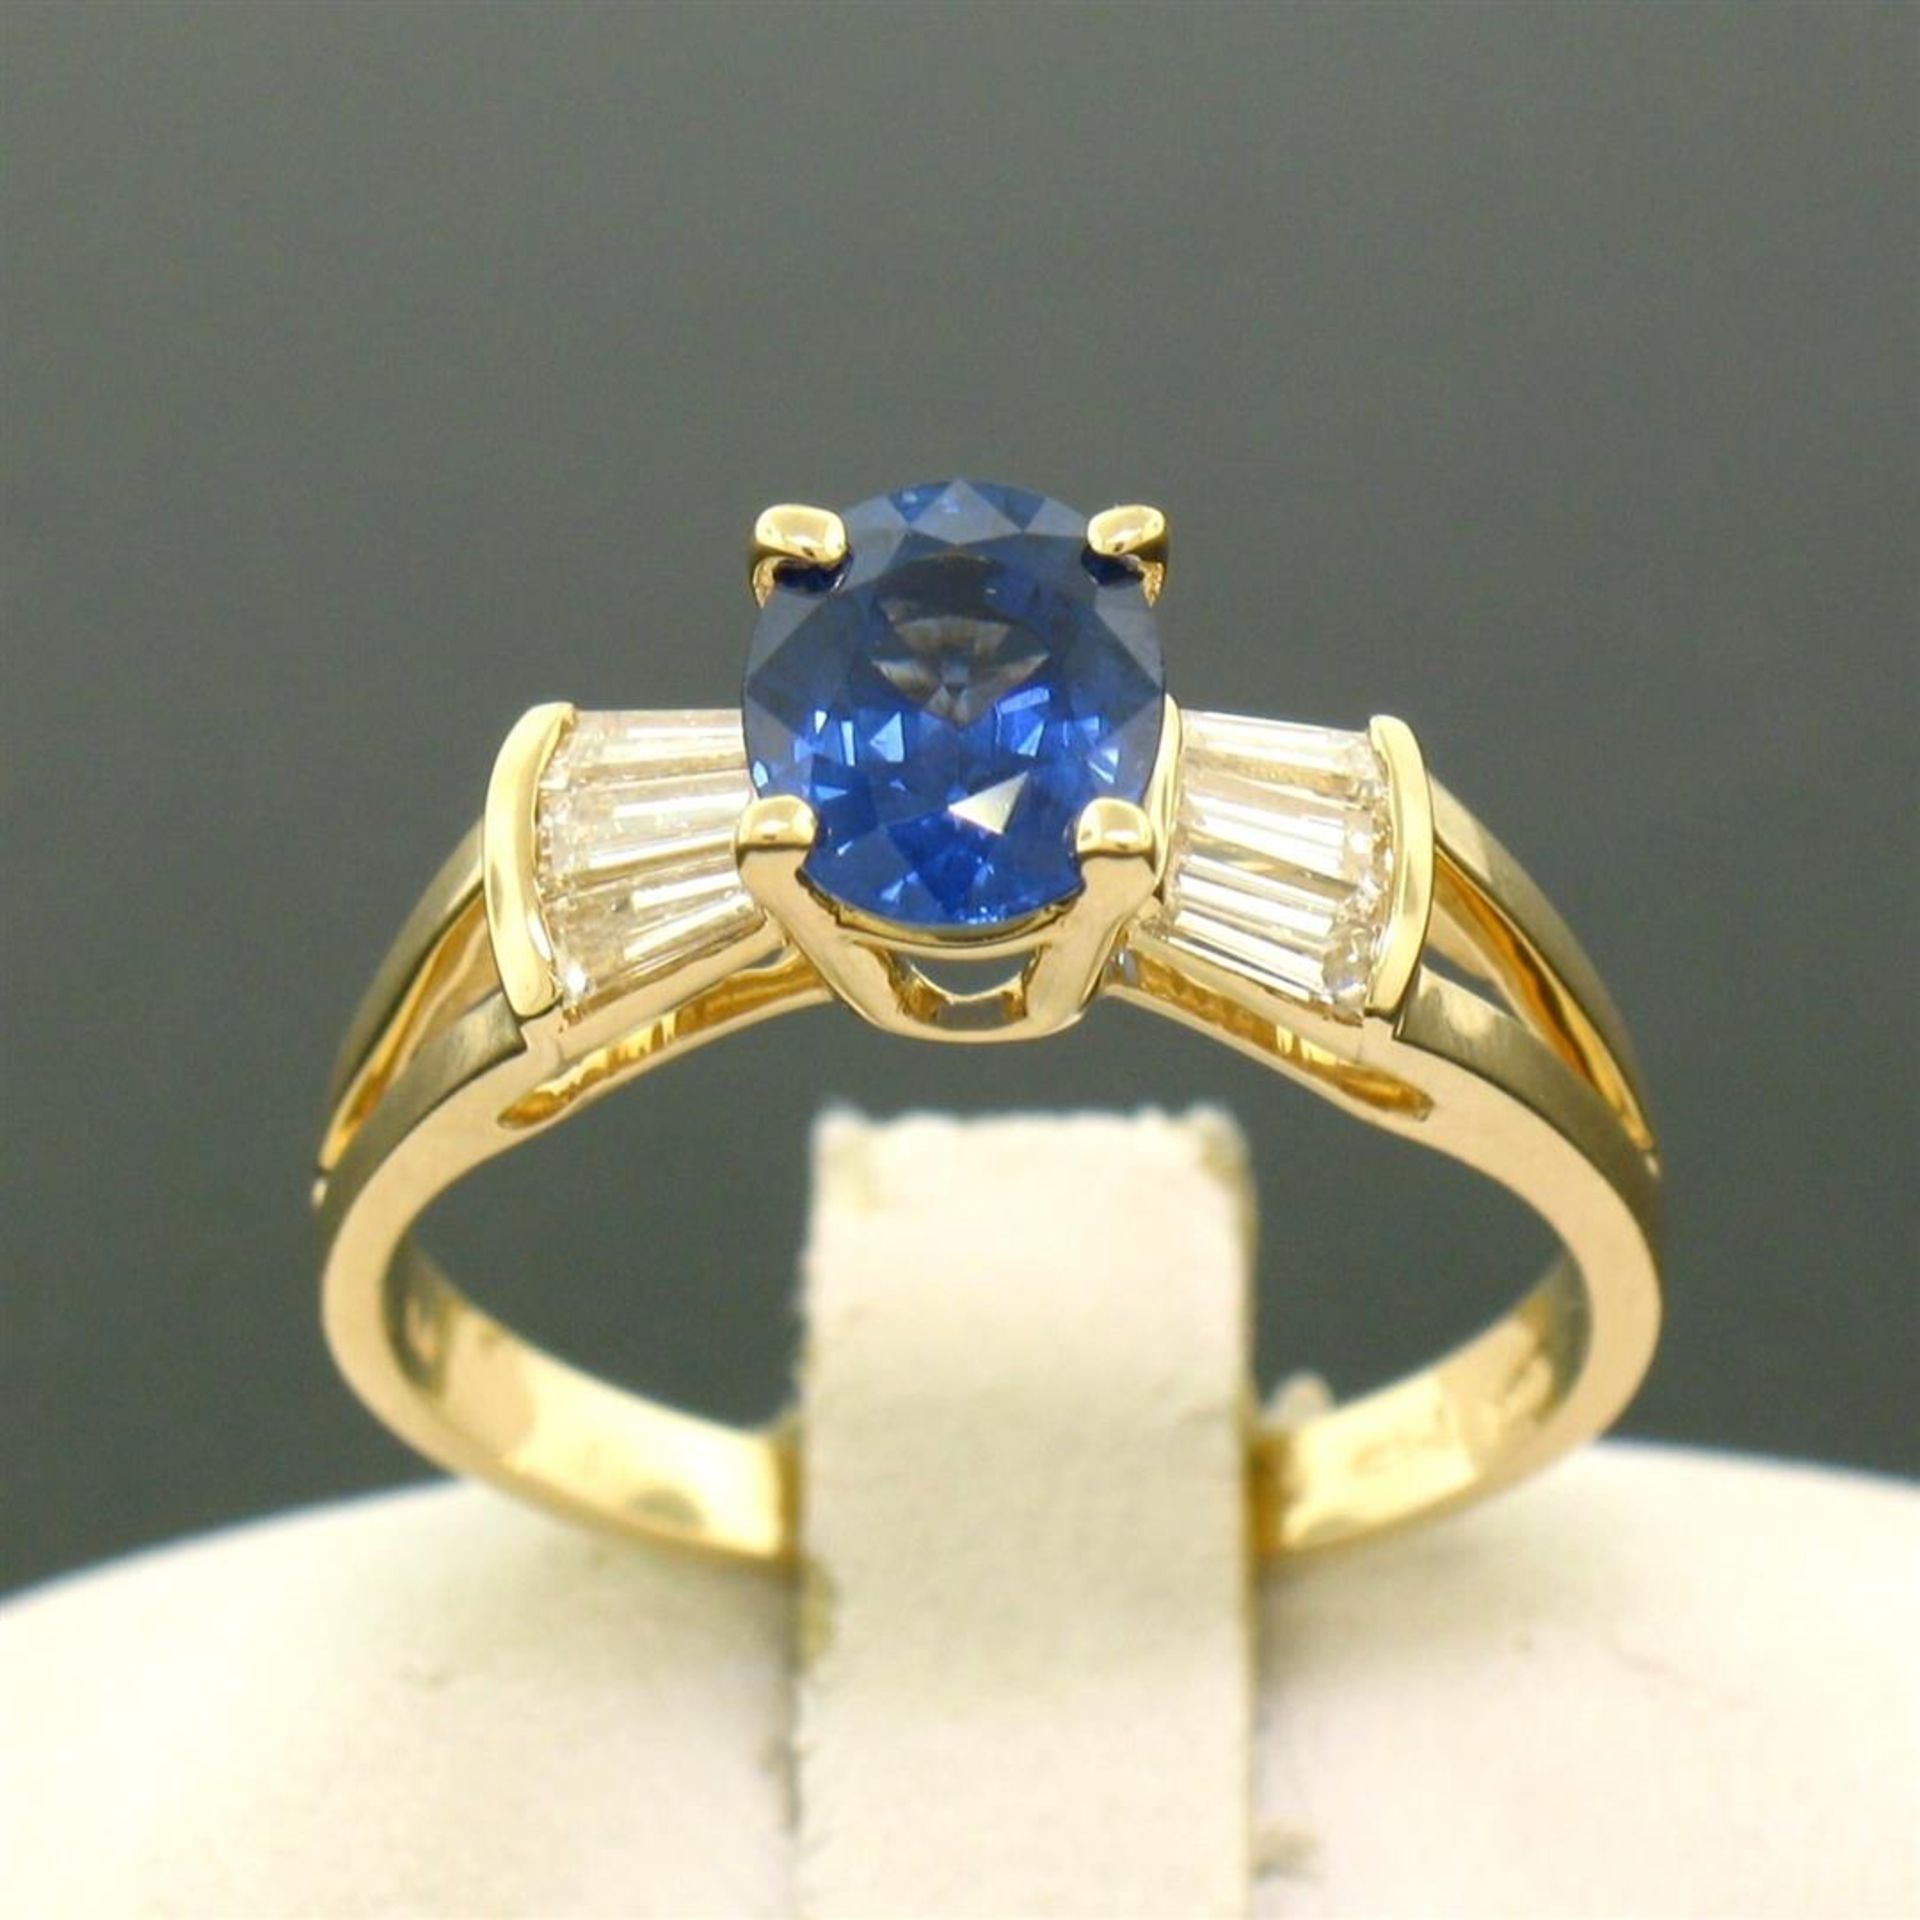 14k Yellow Gold ROYAL BLUE Sapphire Solitaire Ring Fine Baguette Diamond Accents - Image 2 of 9